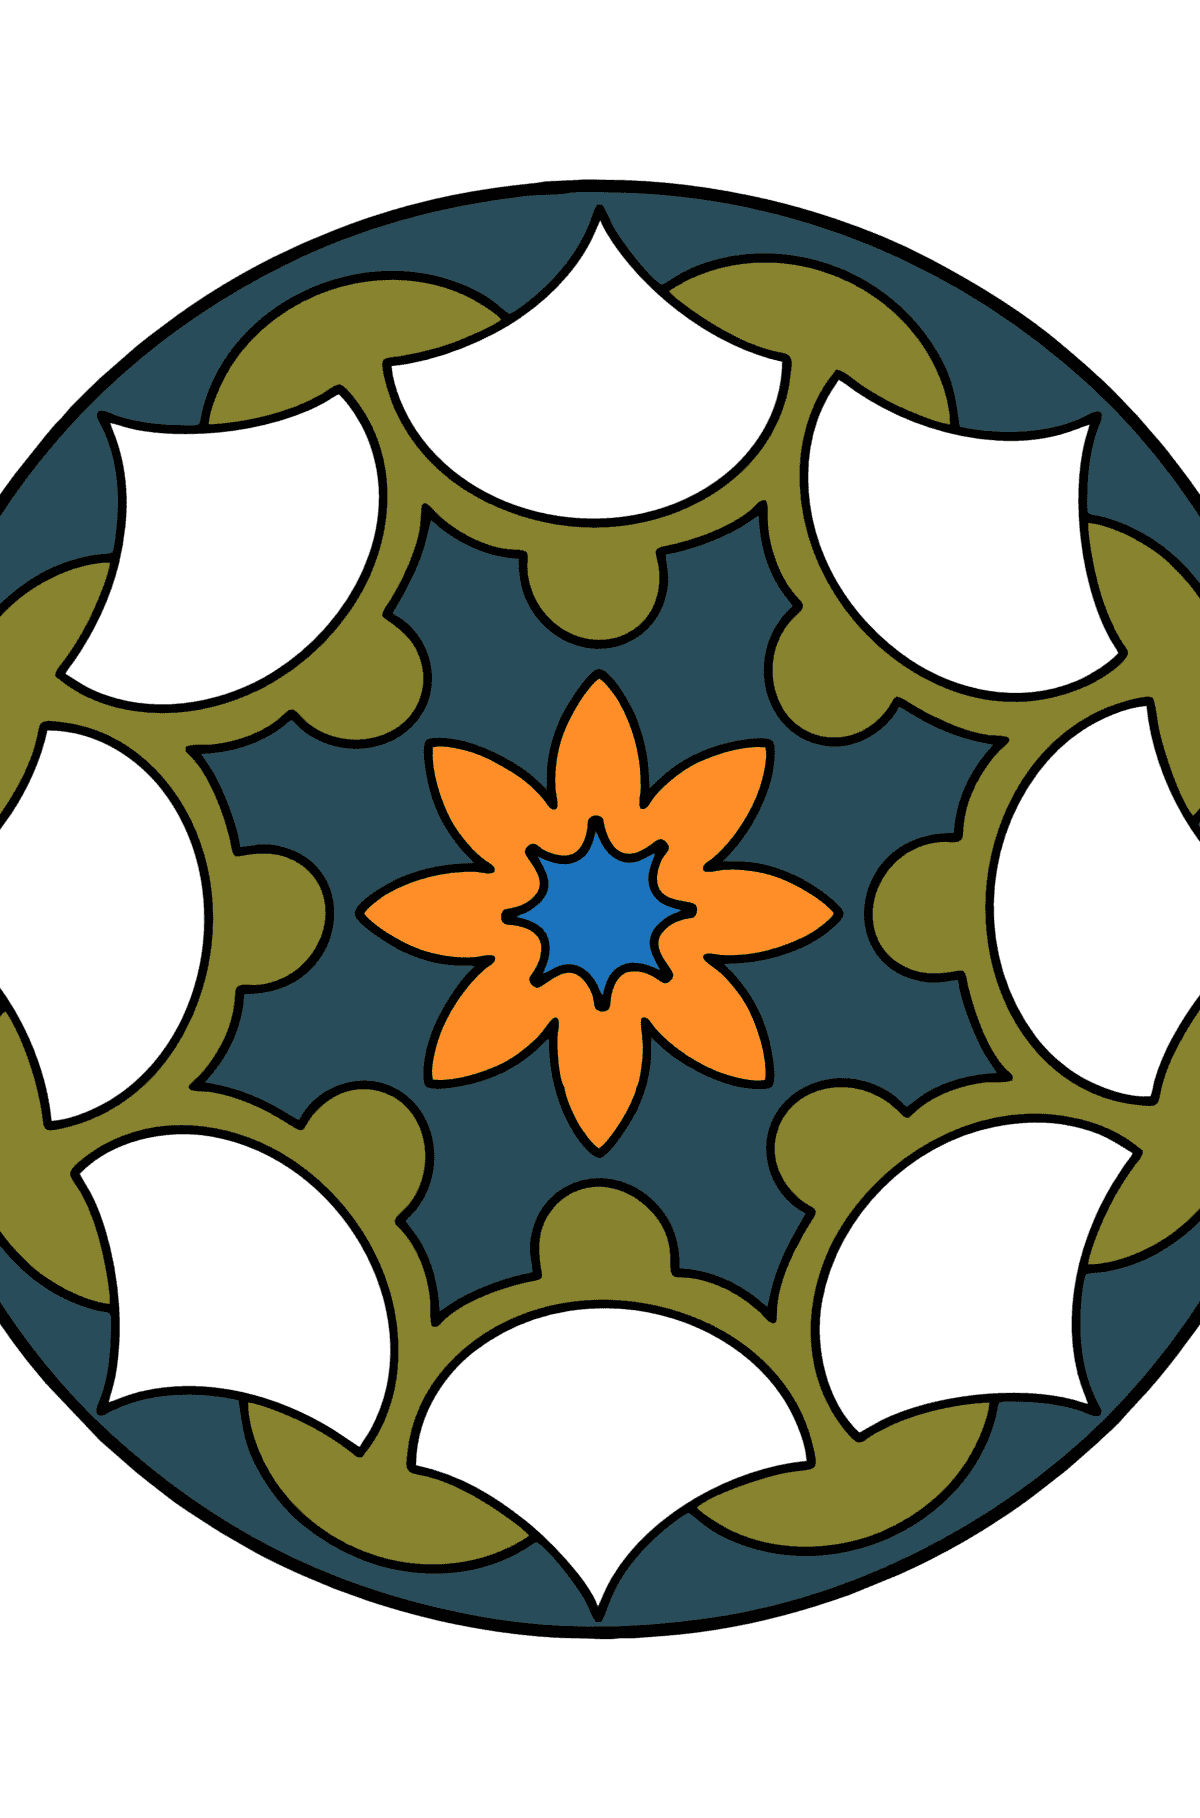 Mandala coloring page - 13 elements - Coloring Pages for Kids